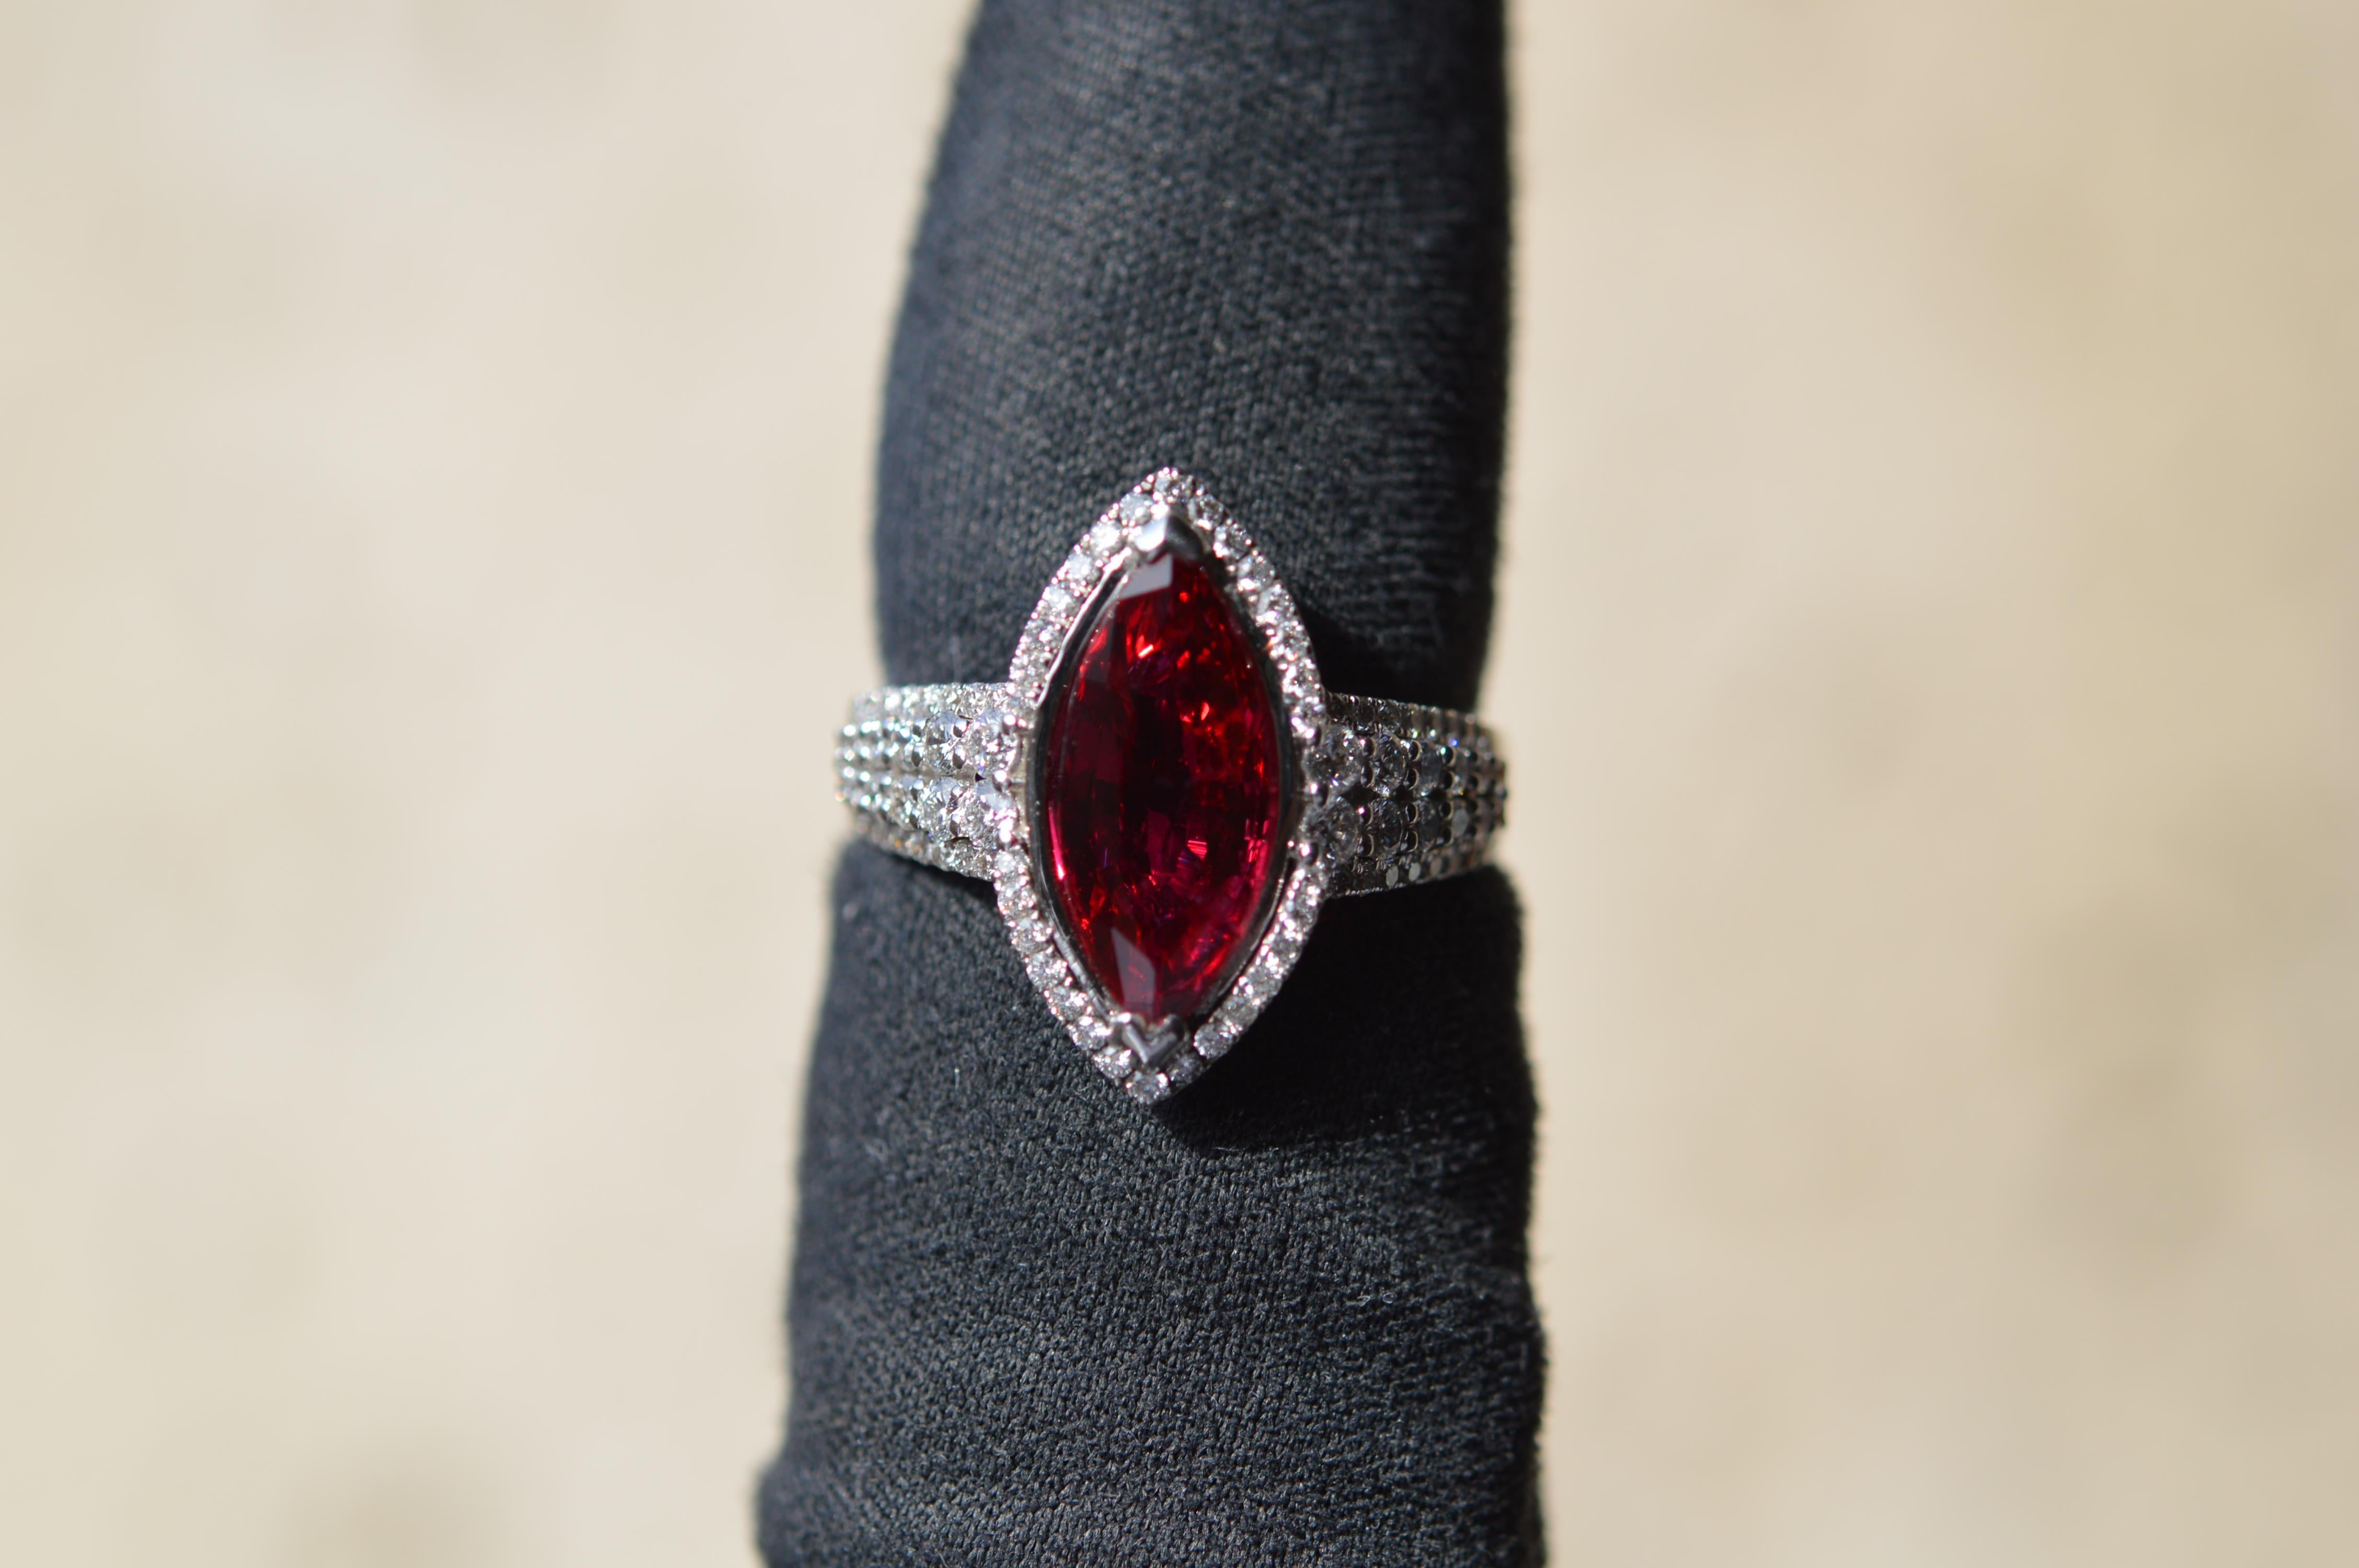 Siam Marquise Ruby Ring 2.95 Cts Heated C.Dunaigre Certified Unworn For Sale 3